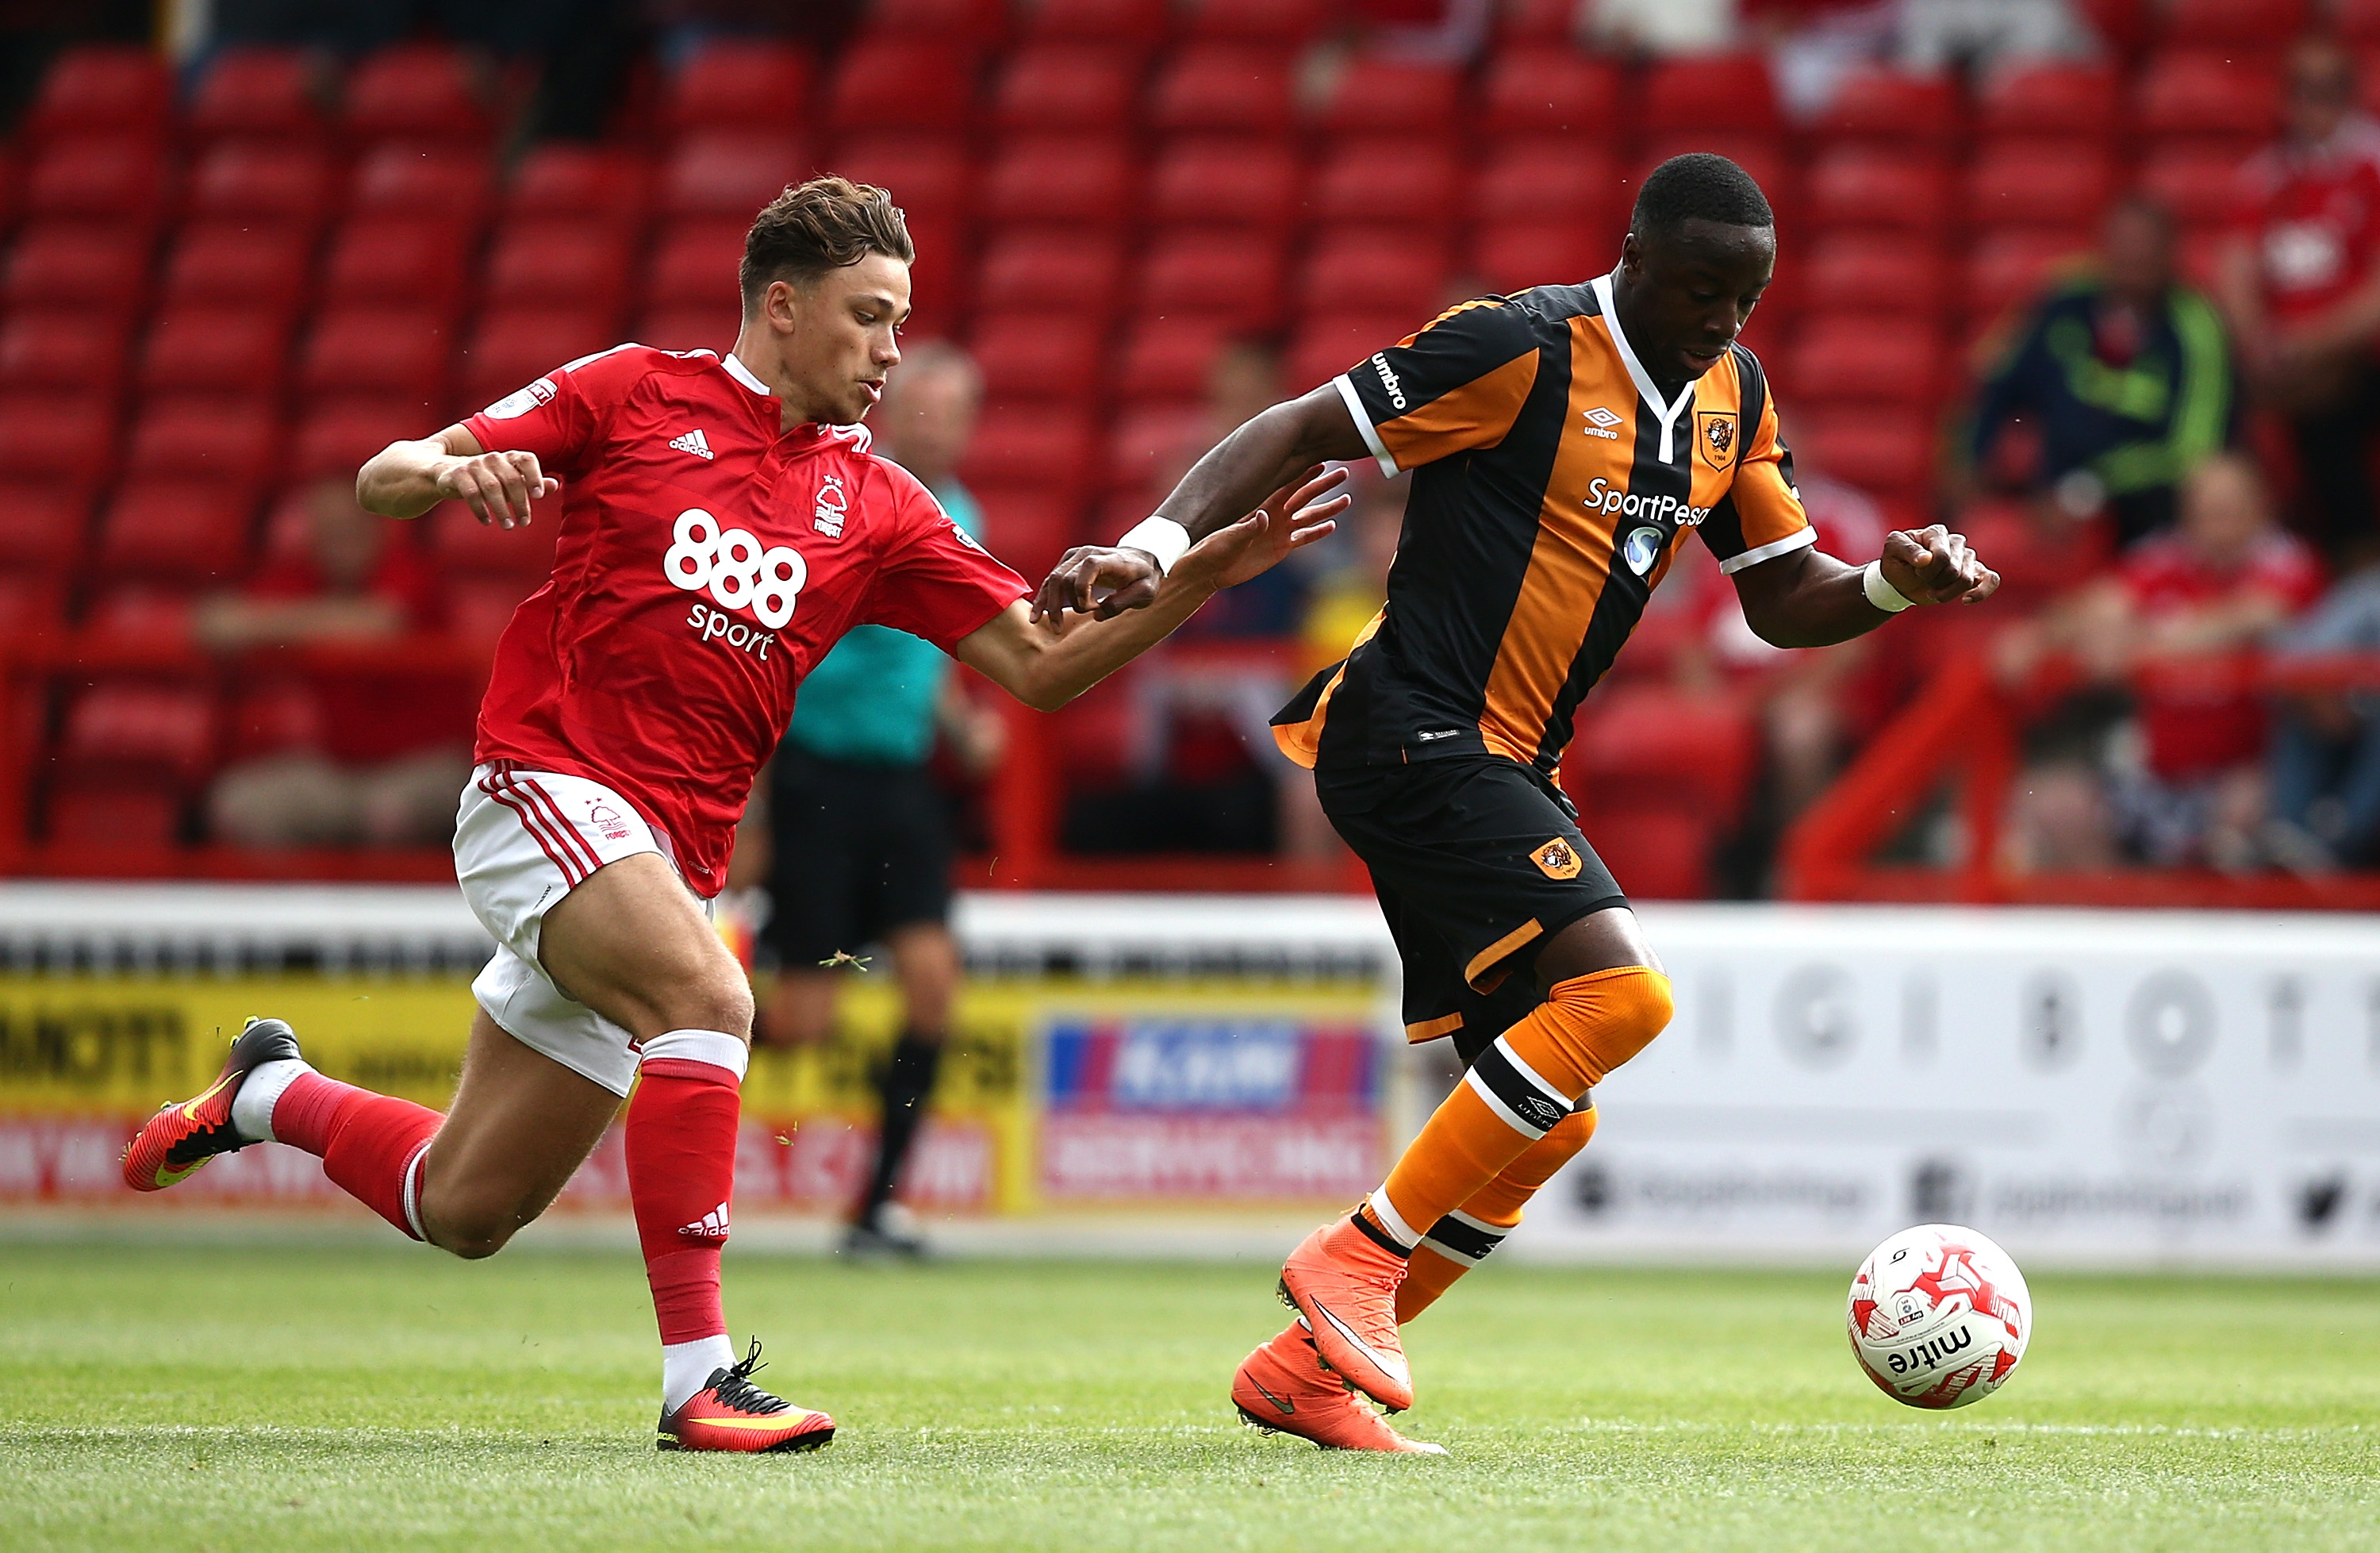 NOTTINGHAM, ENGLAND - JULY 30:  Adama Diomande of Hull City battles with Matty Cash of Nottingham Forest during the pre-season friendly match between Nottingham Forest and Hull City at City Ground on July 30, 2016 in Nottingham, England.  (Photo by Jan Kruger/Getty Images)